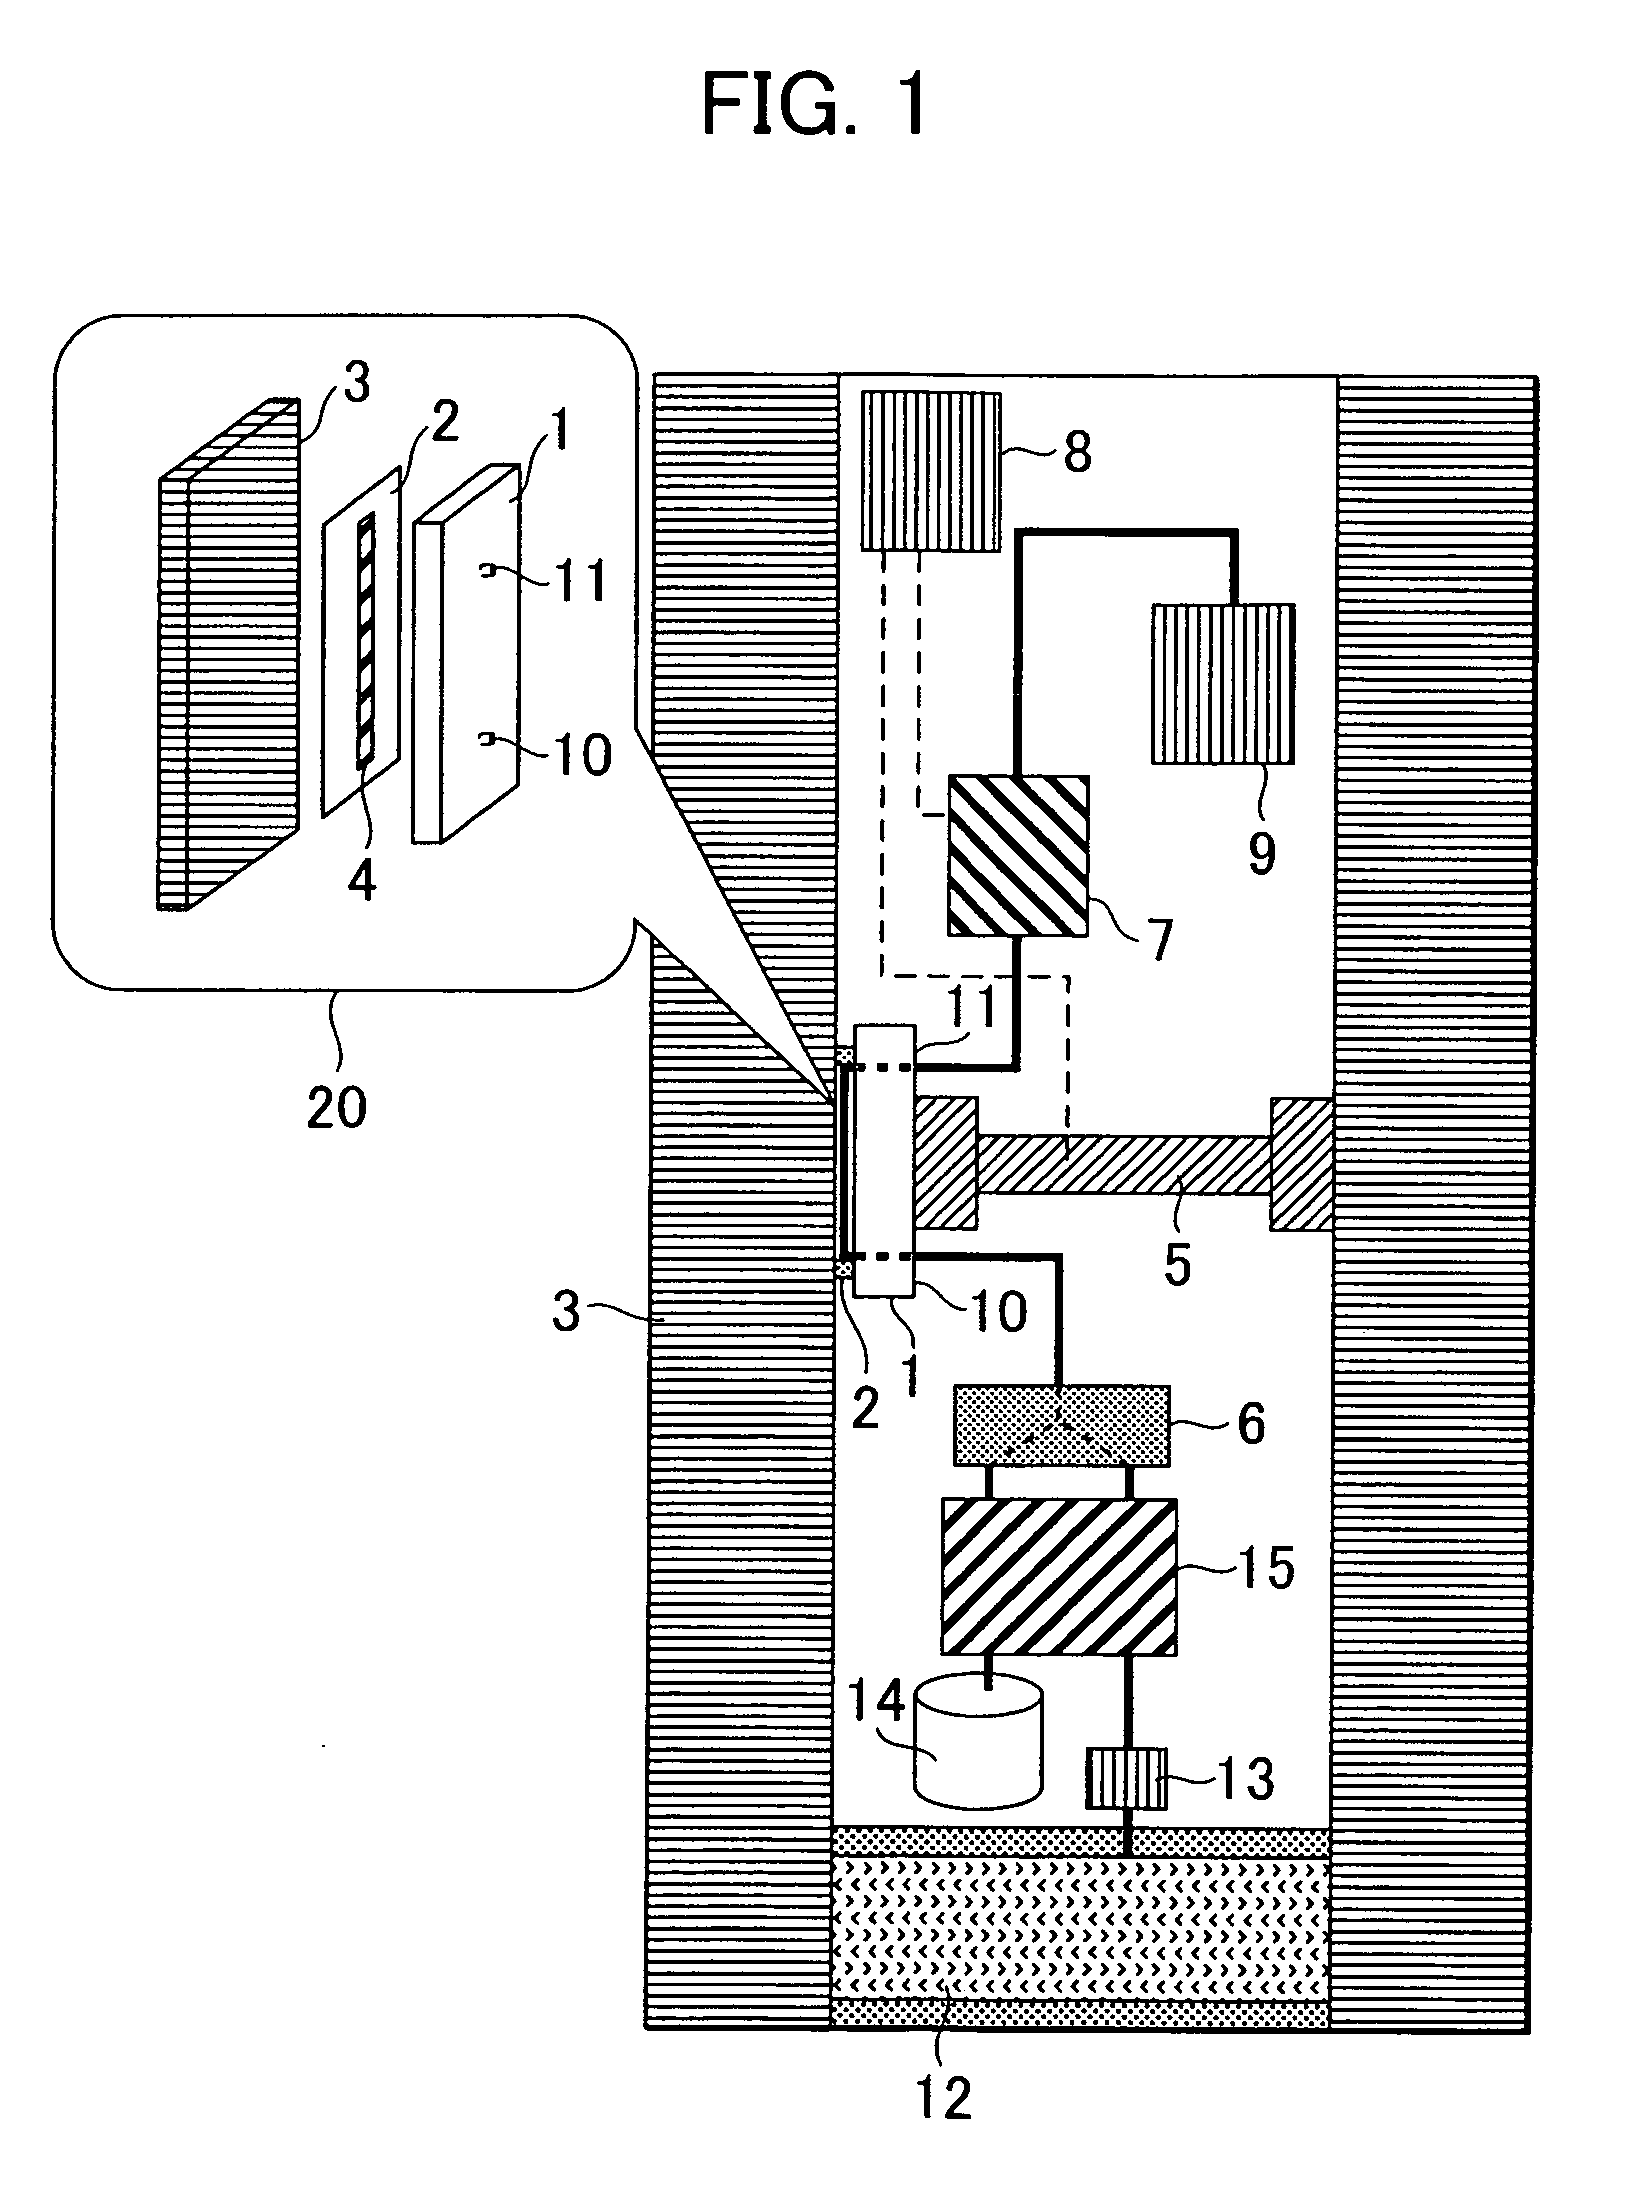 Apparatus and method for evaluating subterranean environments